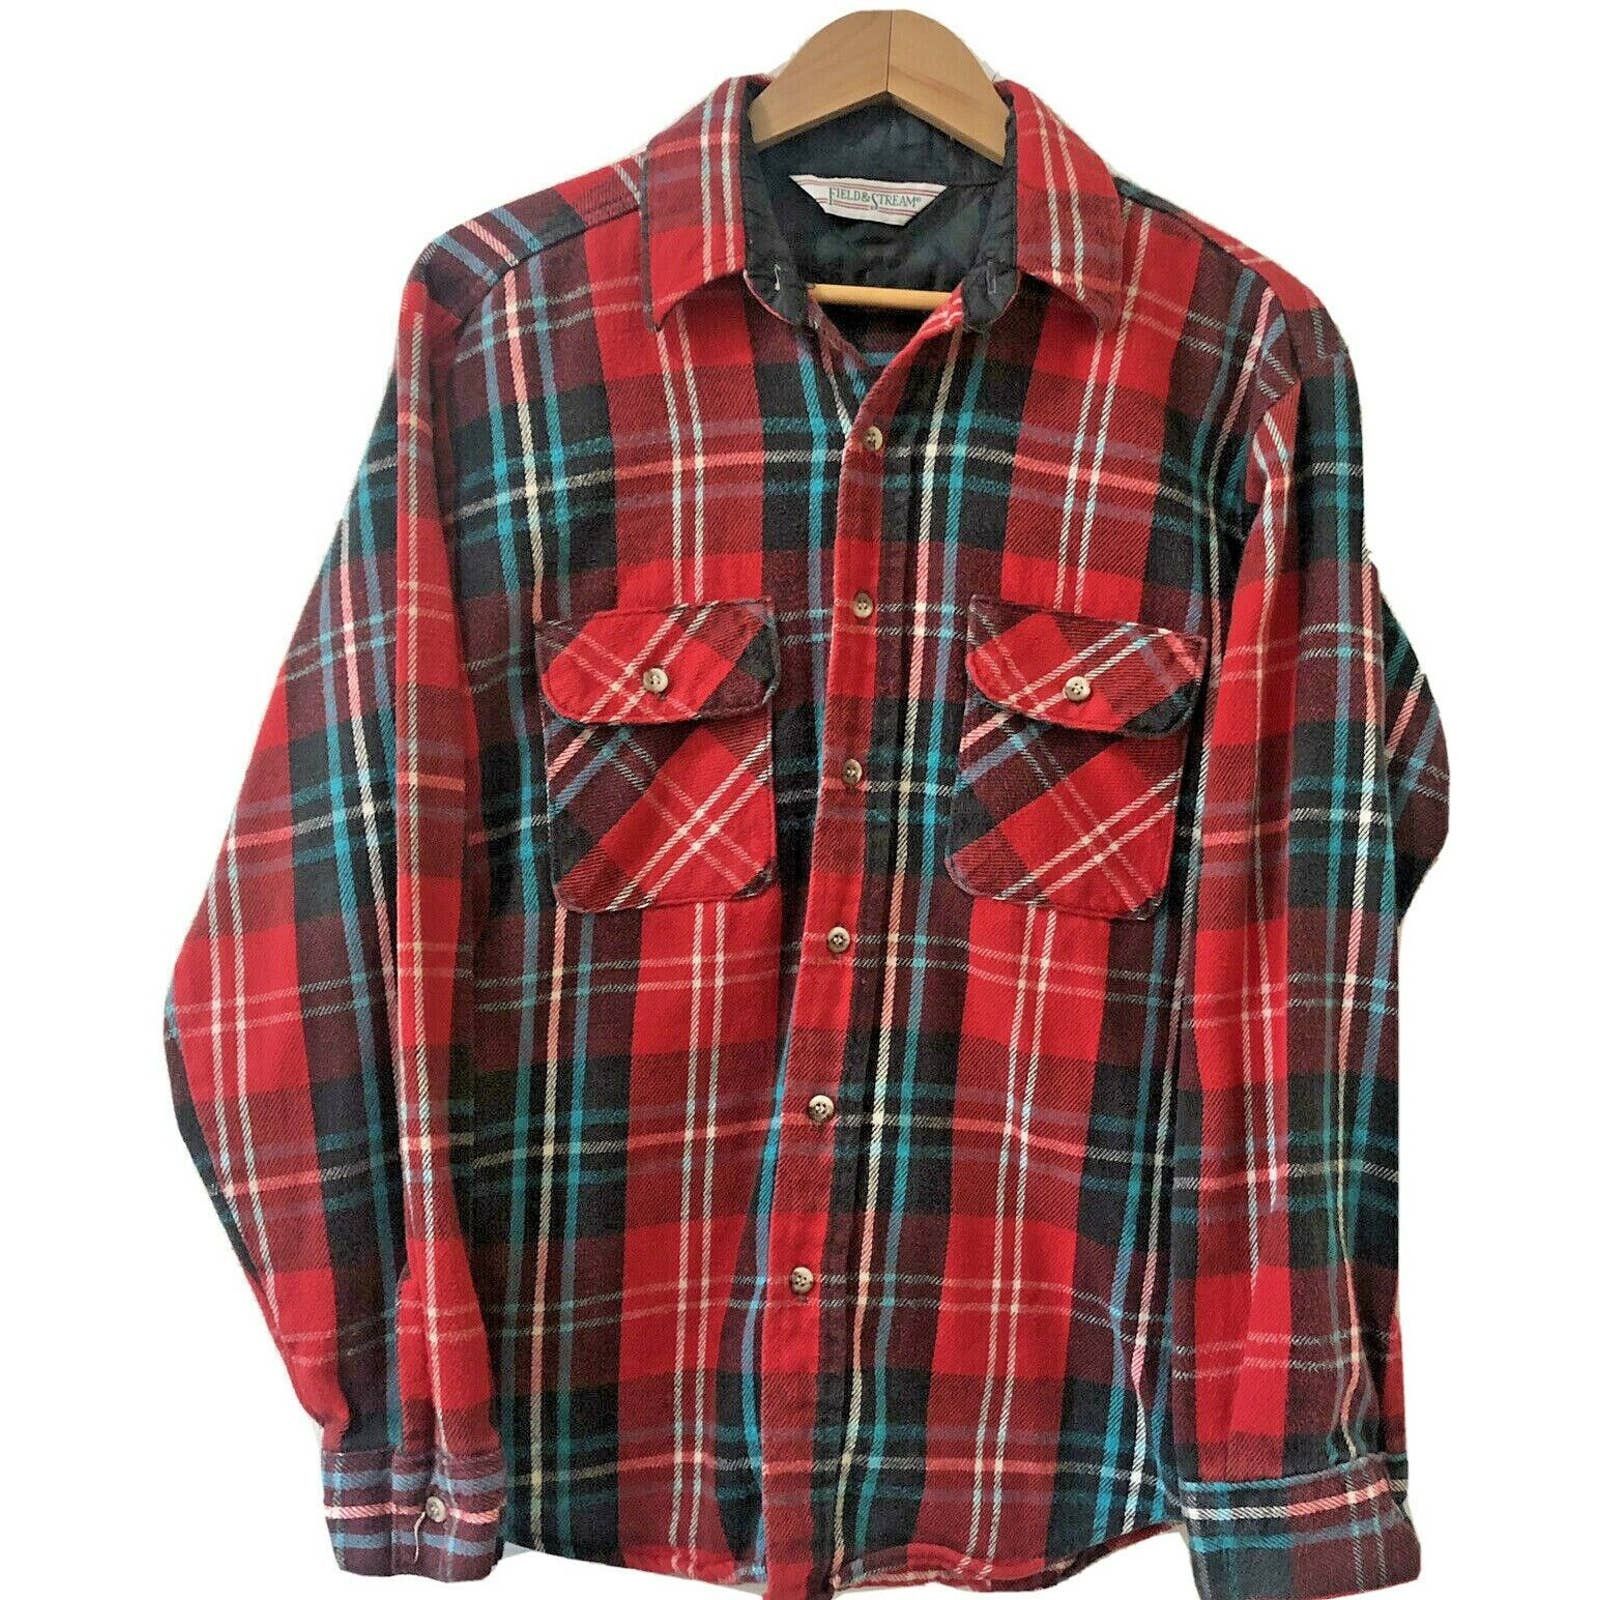 Field And Stream Vintage Field & Stream L Heavy Flannel Red Plaid Made USA Size US L / EU 52-54 / 3 - 3 Thumbnail